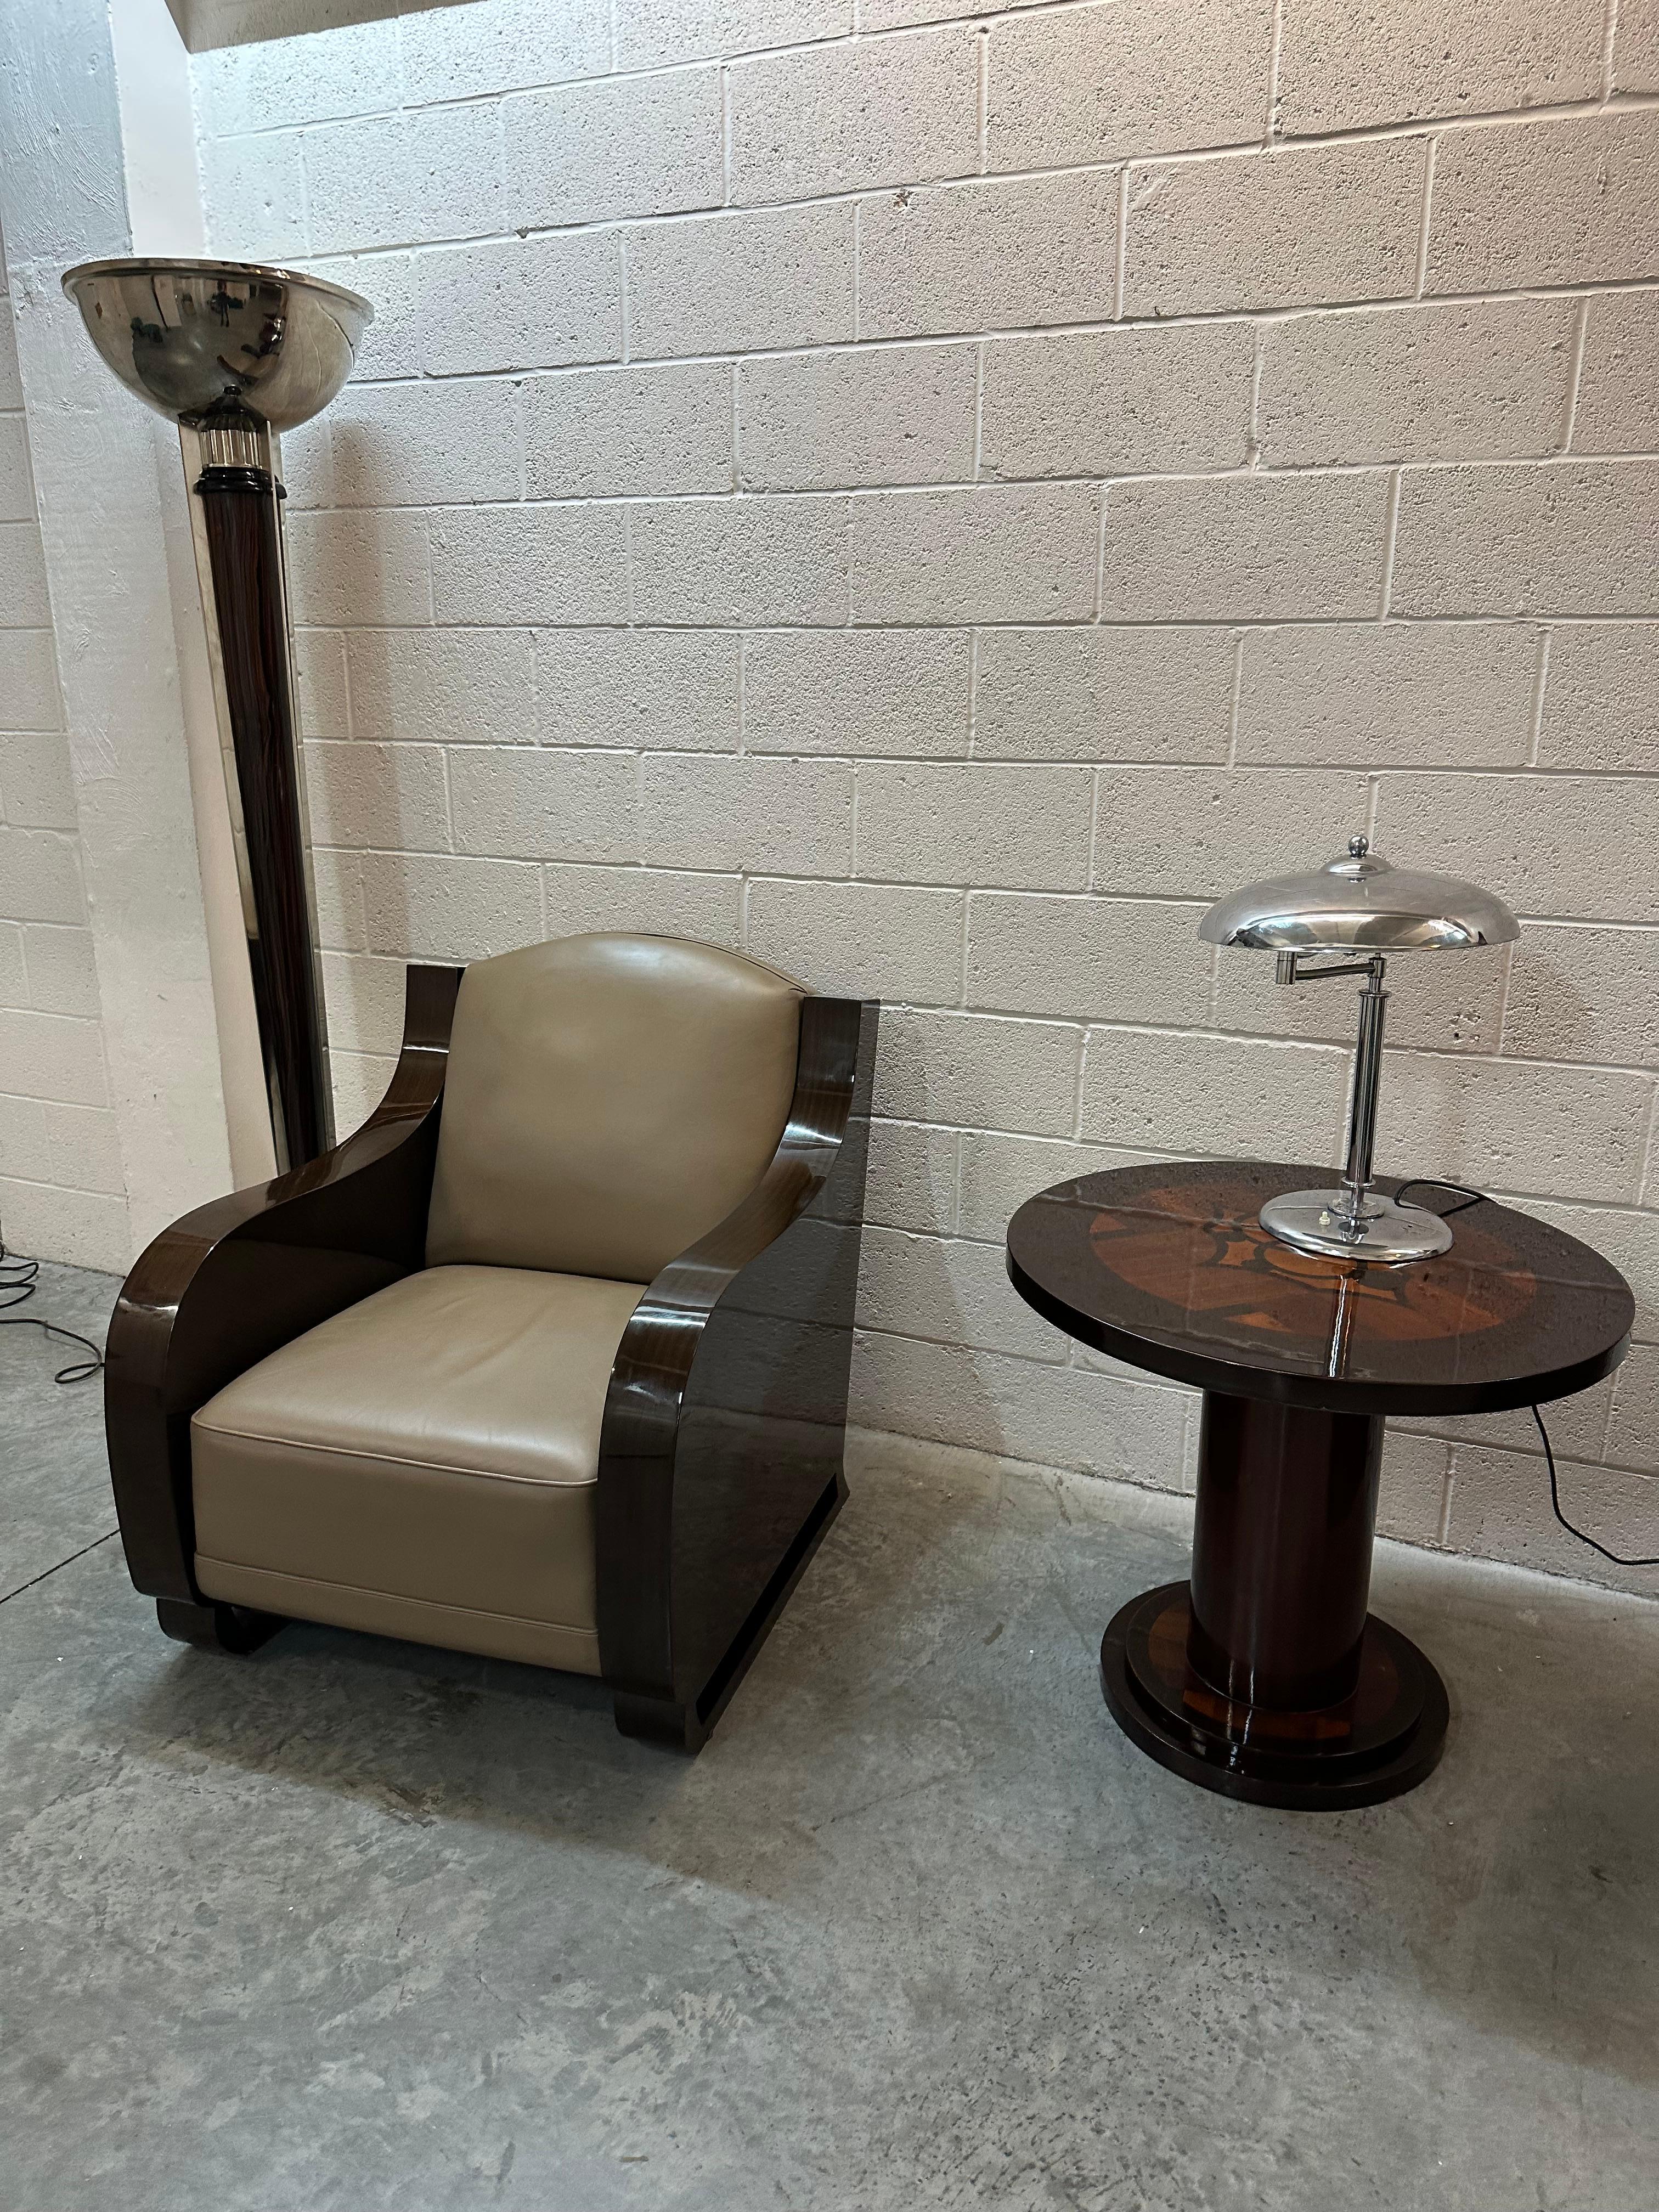 2 Art Deco Floor Lamps, France, Materials: Wood and Chrome, 1930 For Sale 14